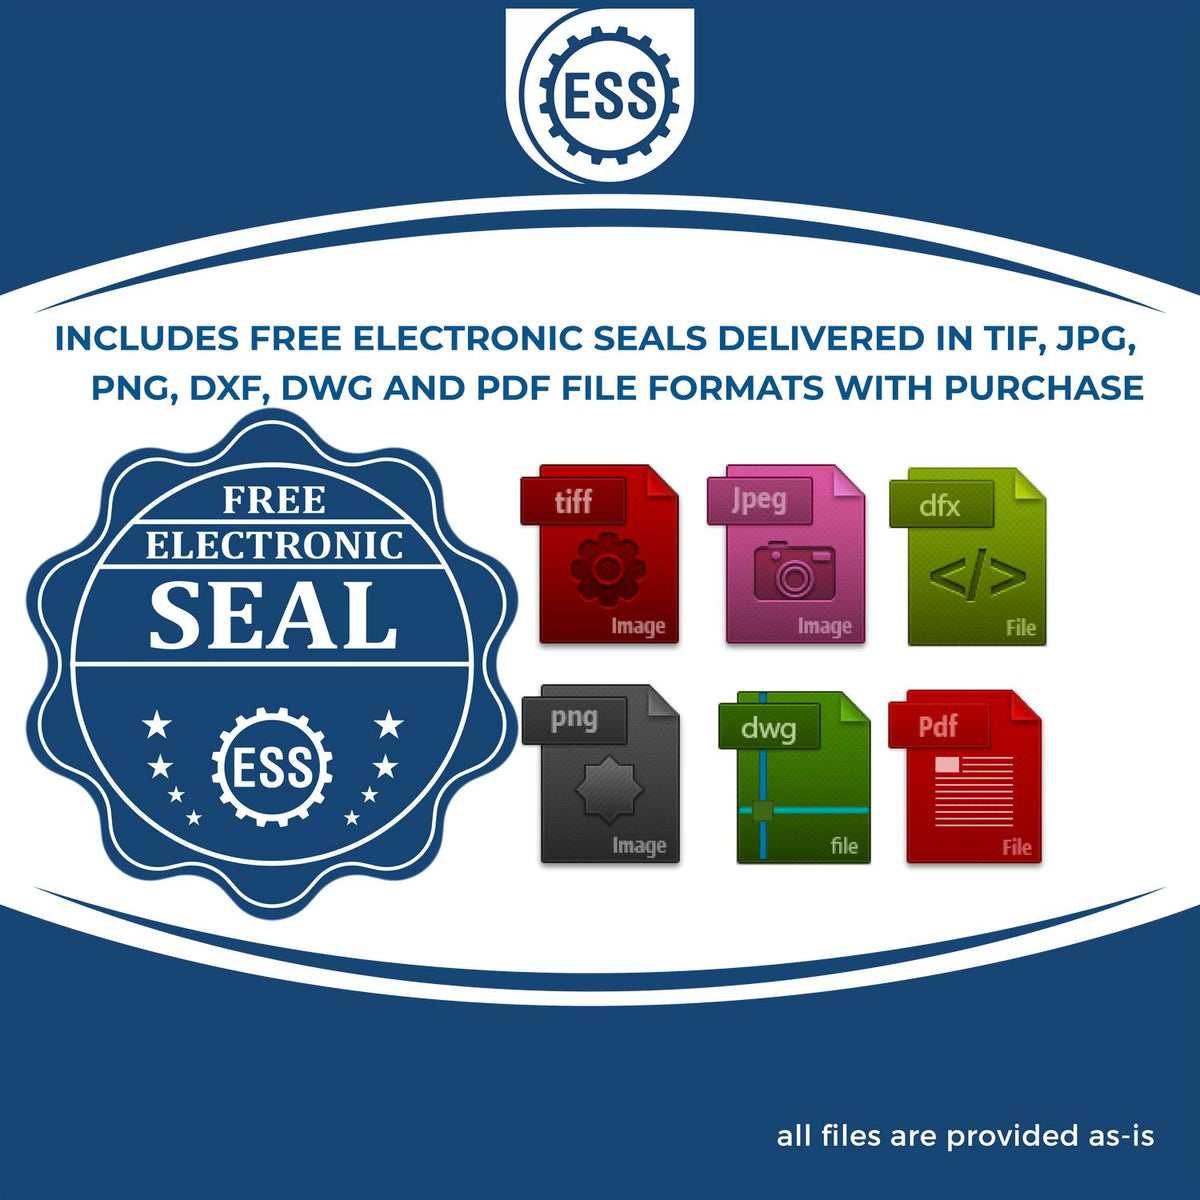 An infographic for the free electronic seal for the Slim Pre-Inked New Mexico Architect Seal Stamp illustrating the different file type icons such as DXF, DWG, TIF, JPG and PNG.